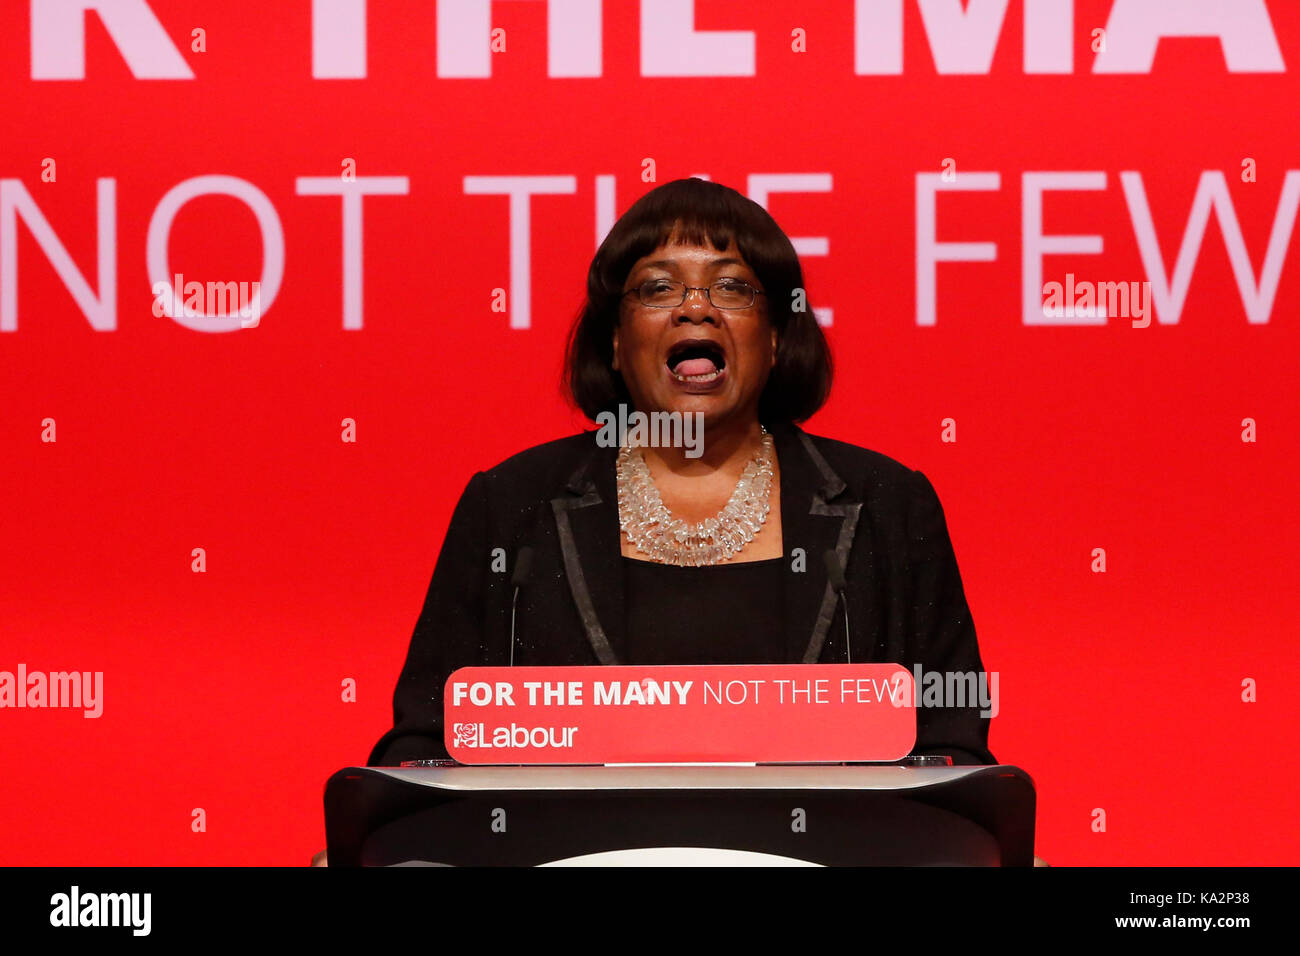 Brighton, UK. 24th September, 2017. Diane Abbott, Shadow Home Secretary, makes a speech during the annual Labour Party Conference in Brighton, UK Sunday, September 24, 2017. Photograph : Credit: Luke MacGregor/Alamy Live News Stock Photo